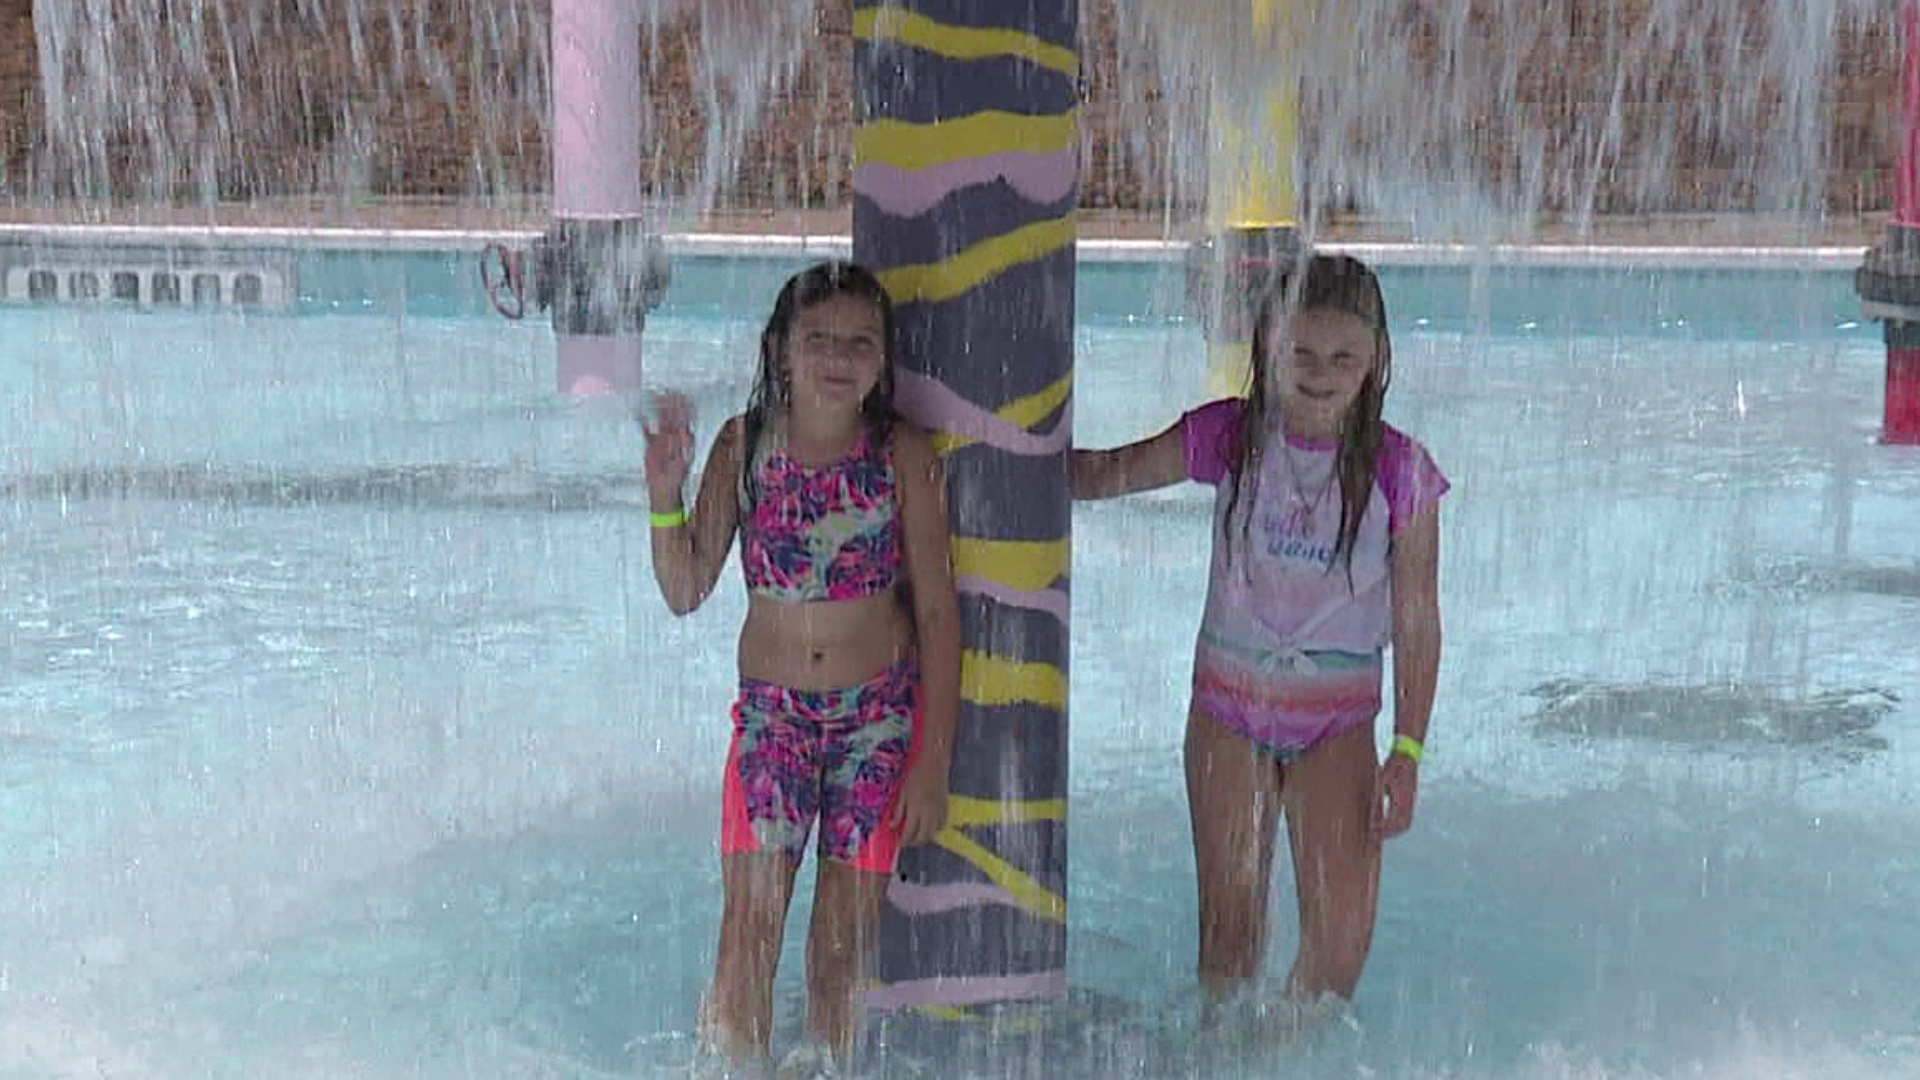 The price of admission at Montage Mountain's water park got you more than just access to all the slides and pools Monday.